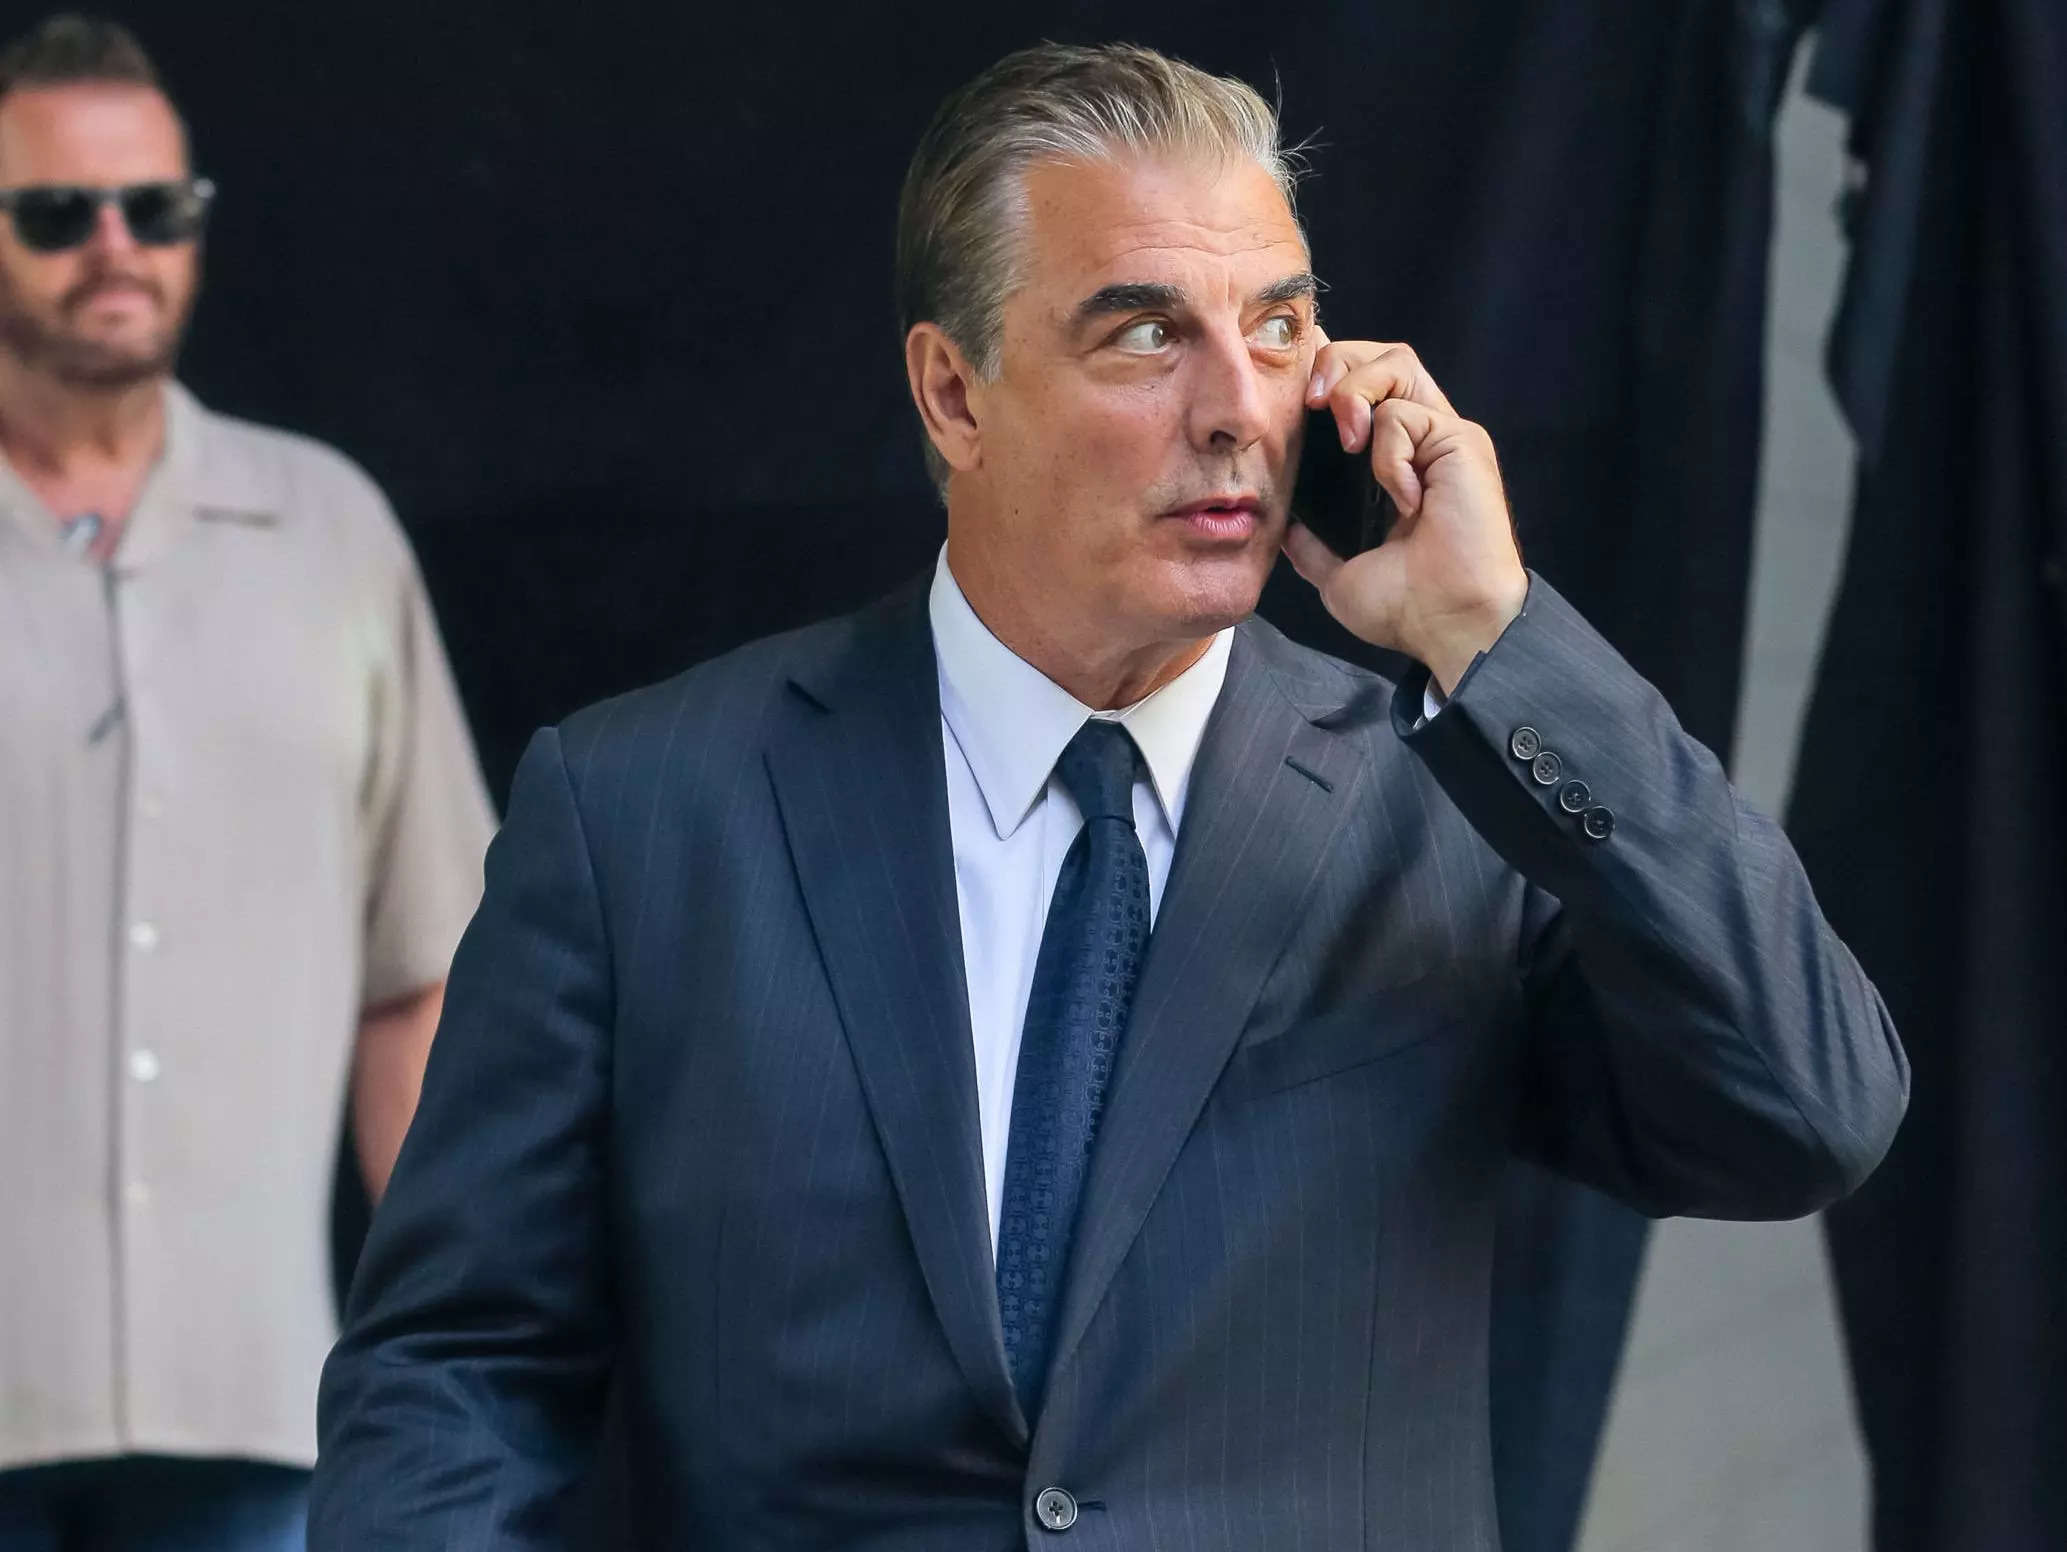 Sex And The City Star Chris Noth Accused By 2 Women Of Sexual Assault Business Insider India